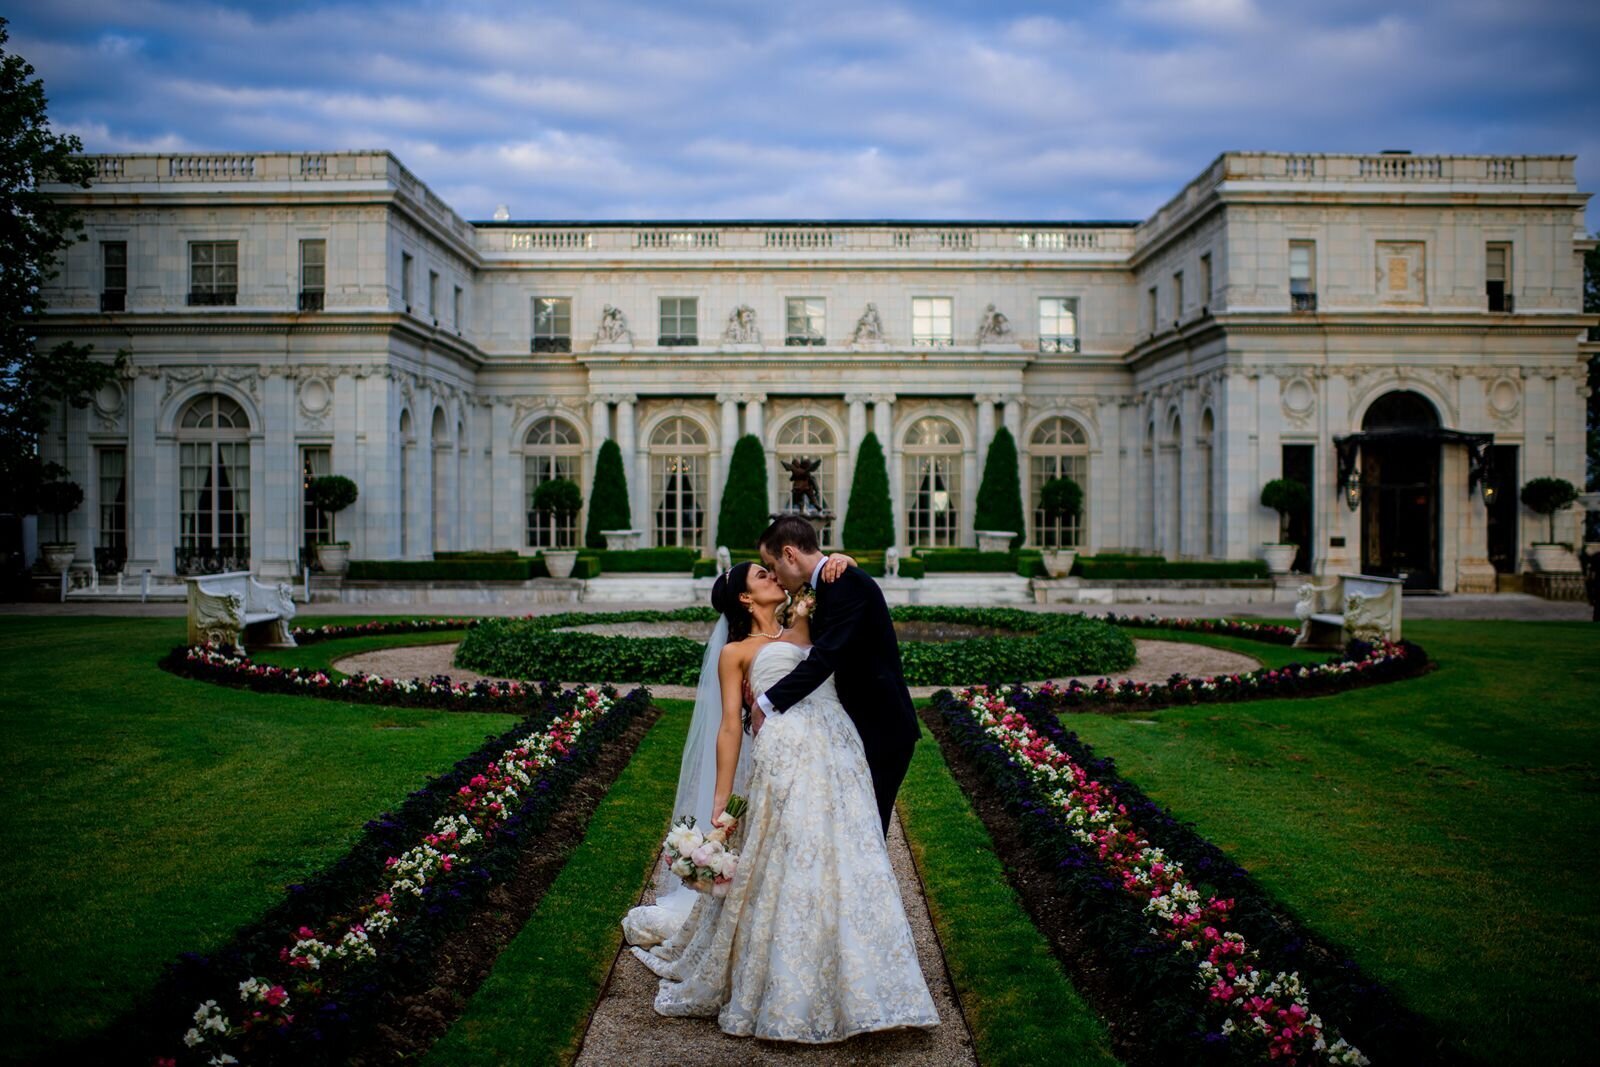 leila-james-events-newport-ri-wedding-planning-luxury-events-rosecliff-mansion-laura-and-seamus-trevor-holden-photography-29- COVER